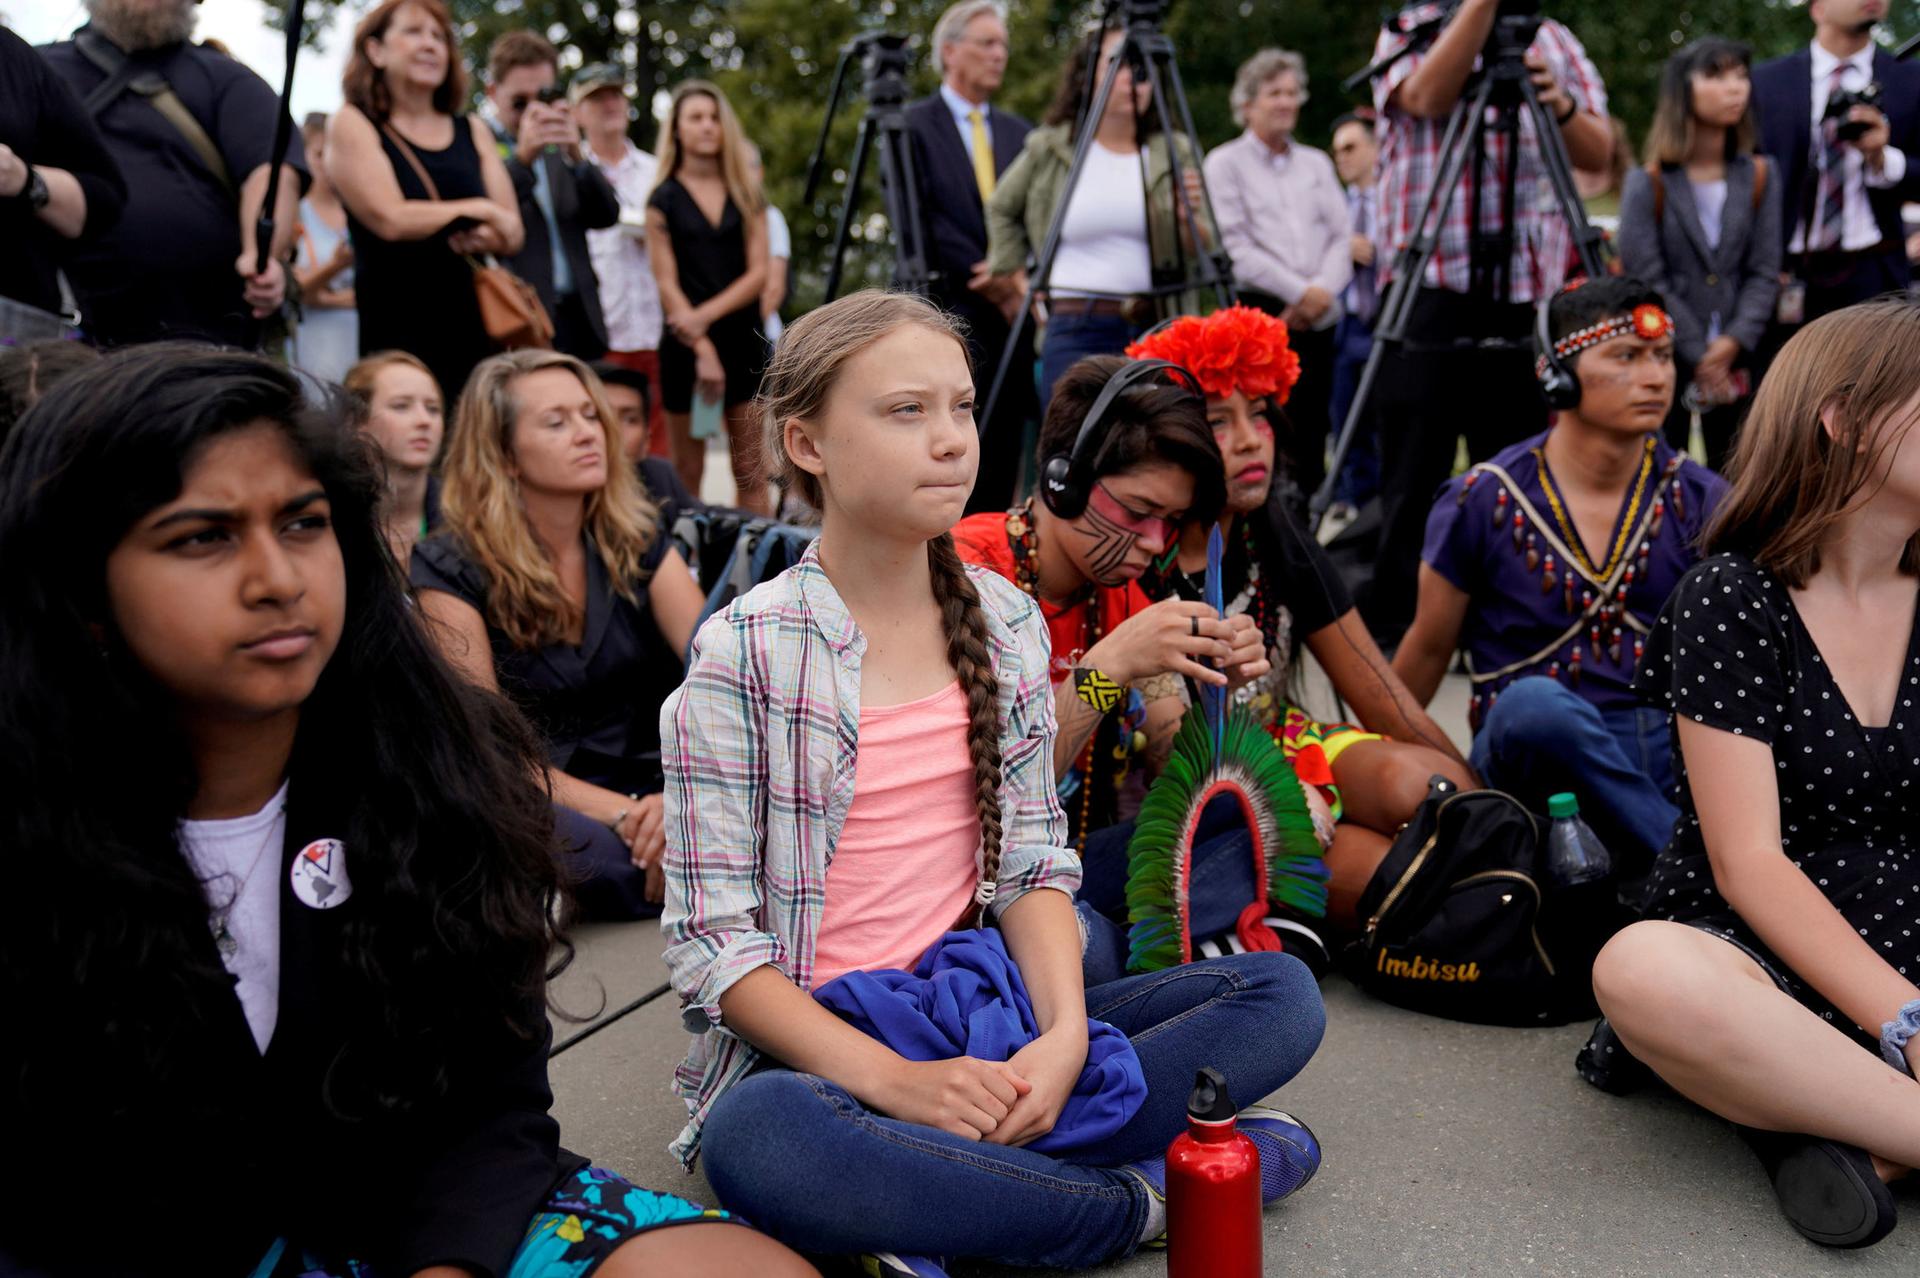 Swedish climate activist Greta Thunberg is shown sitting on the ground with her legs crossed and with a red water bottle.